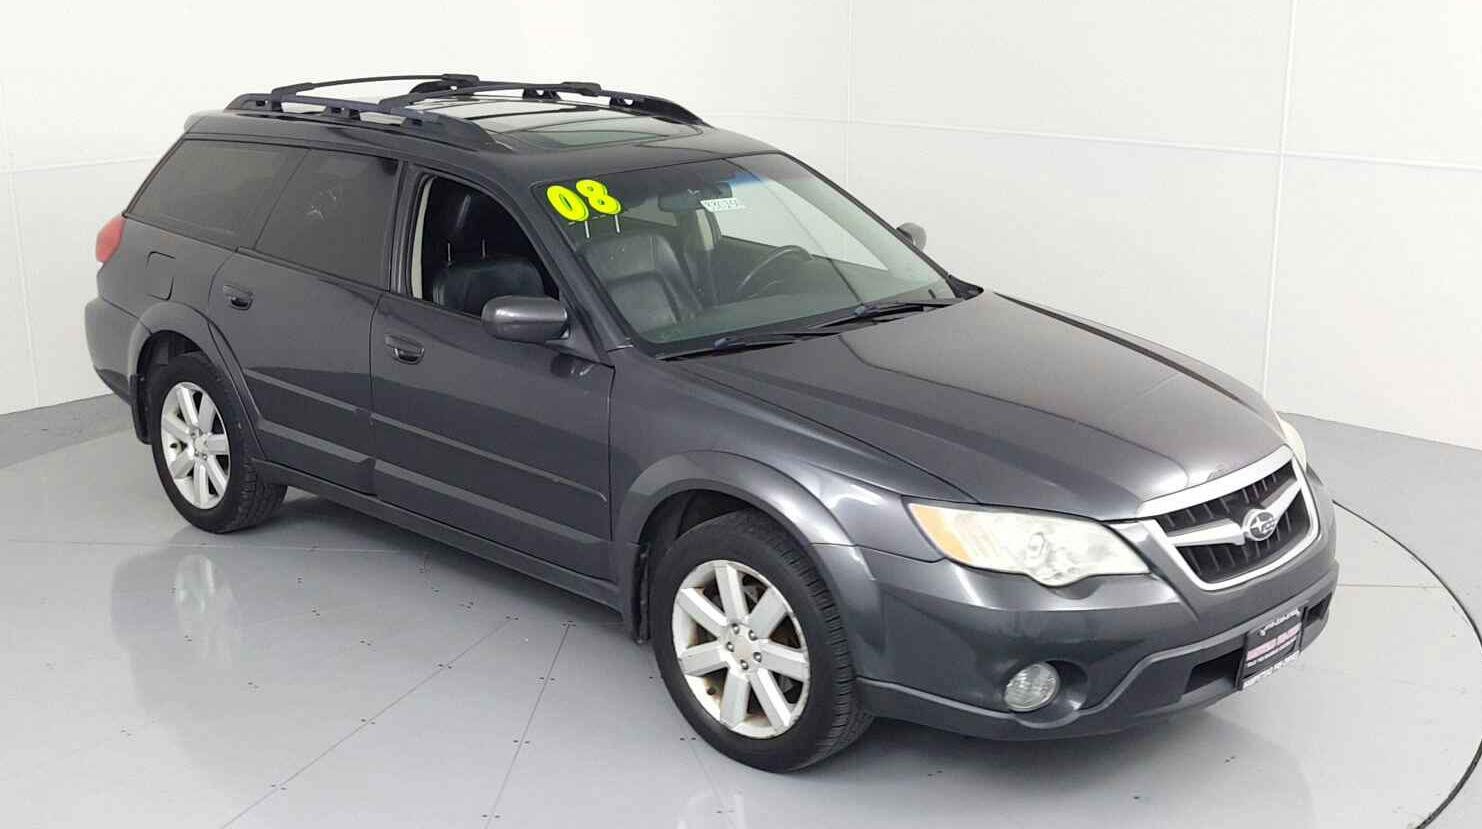 Pre-owned 2008 Subaru Outback for sale